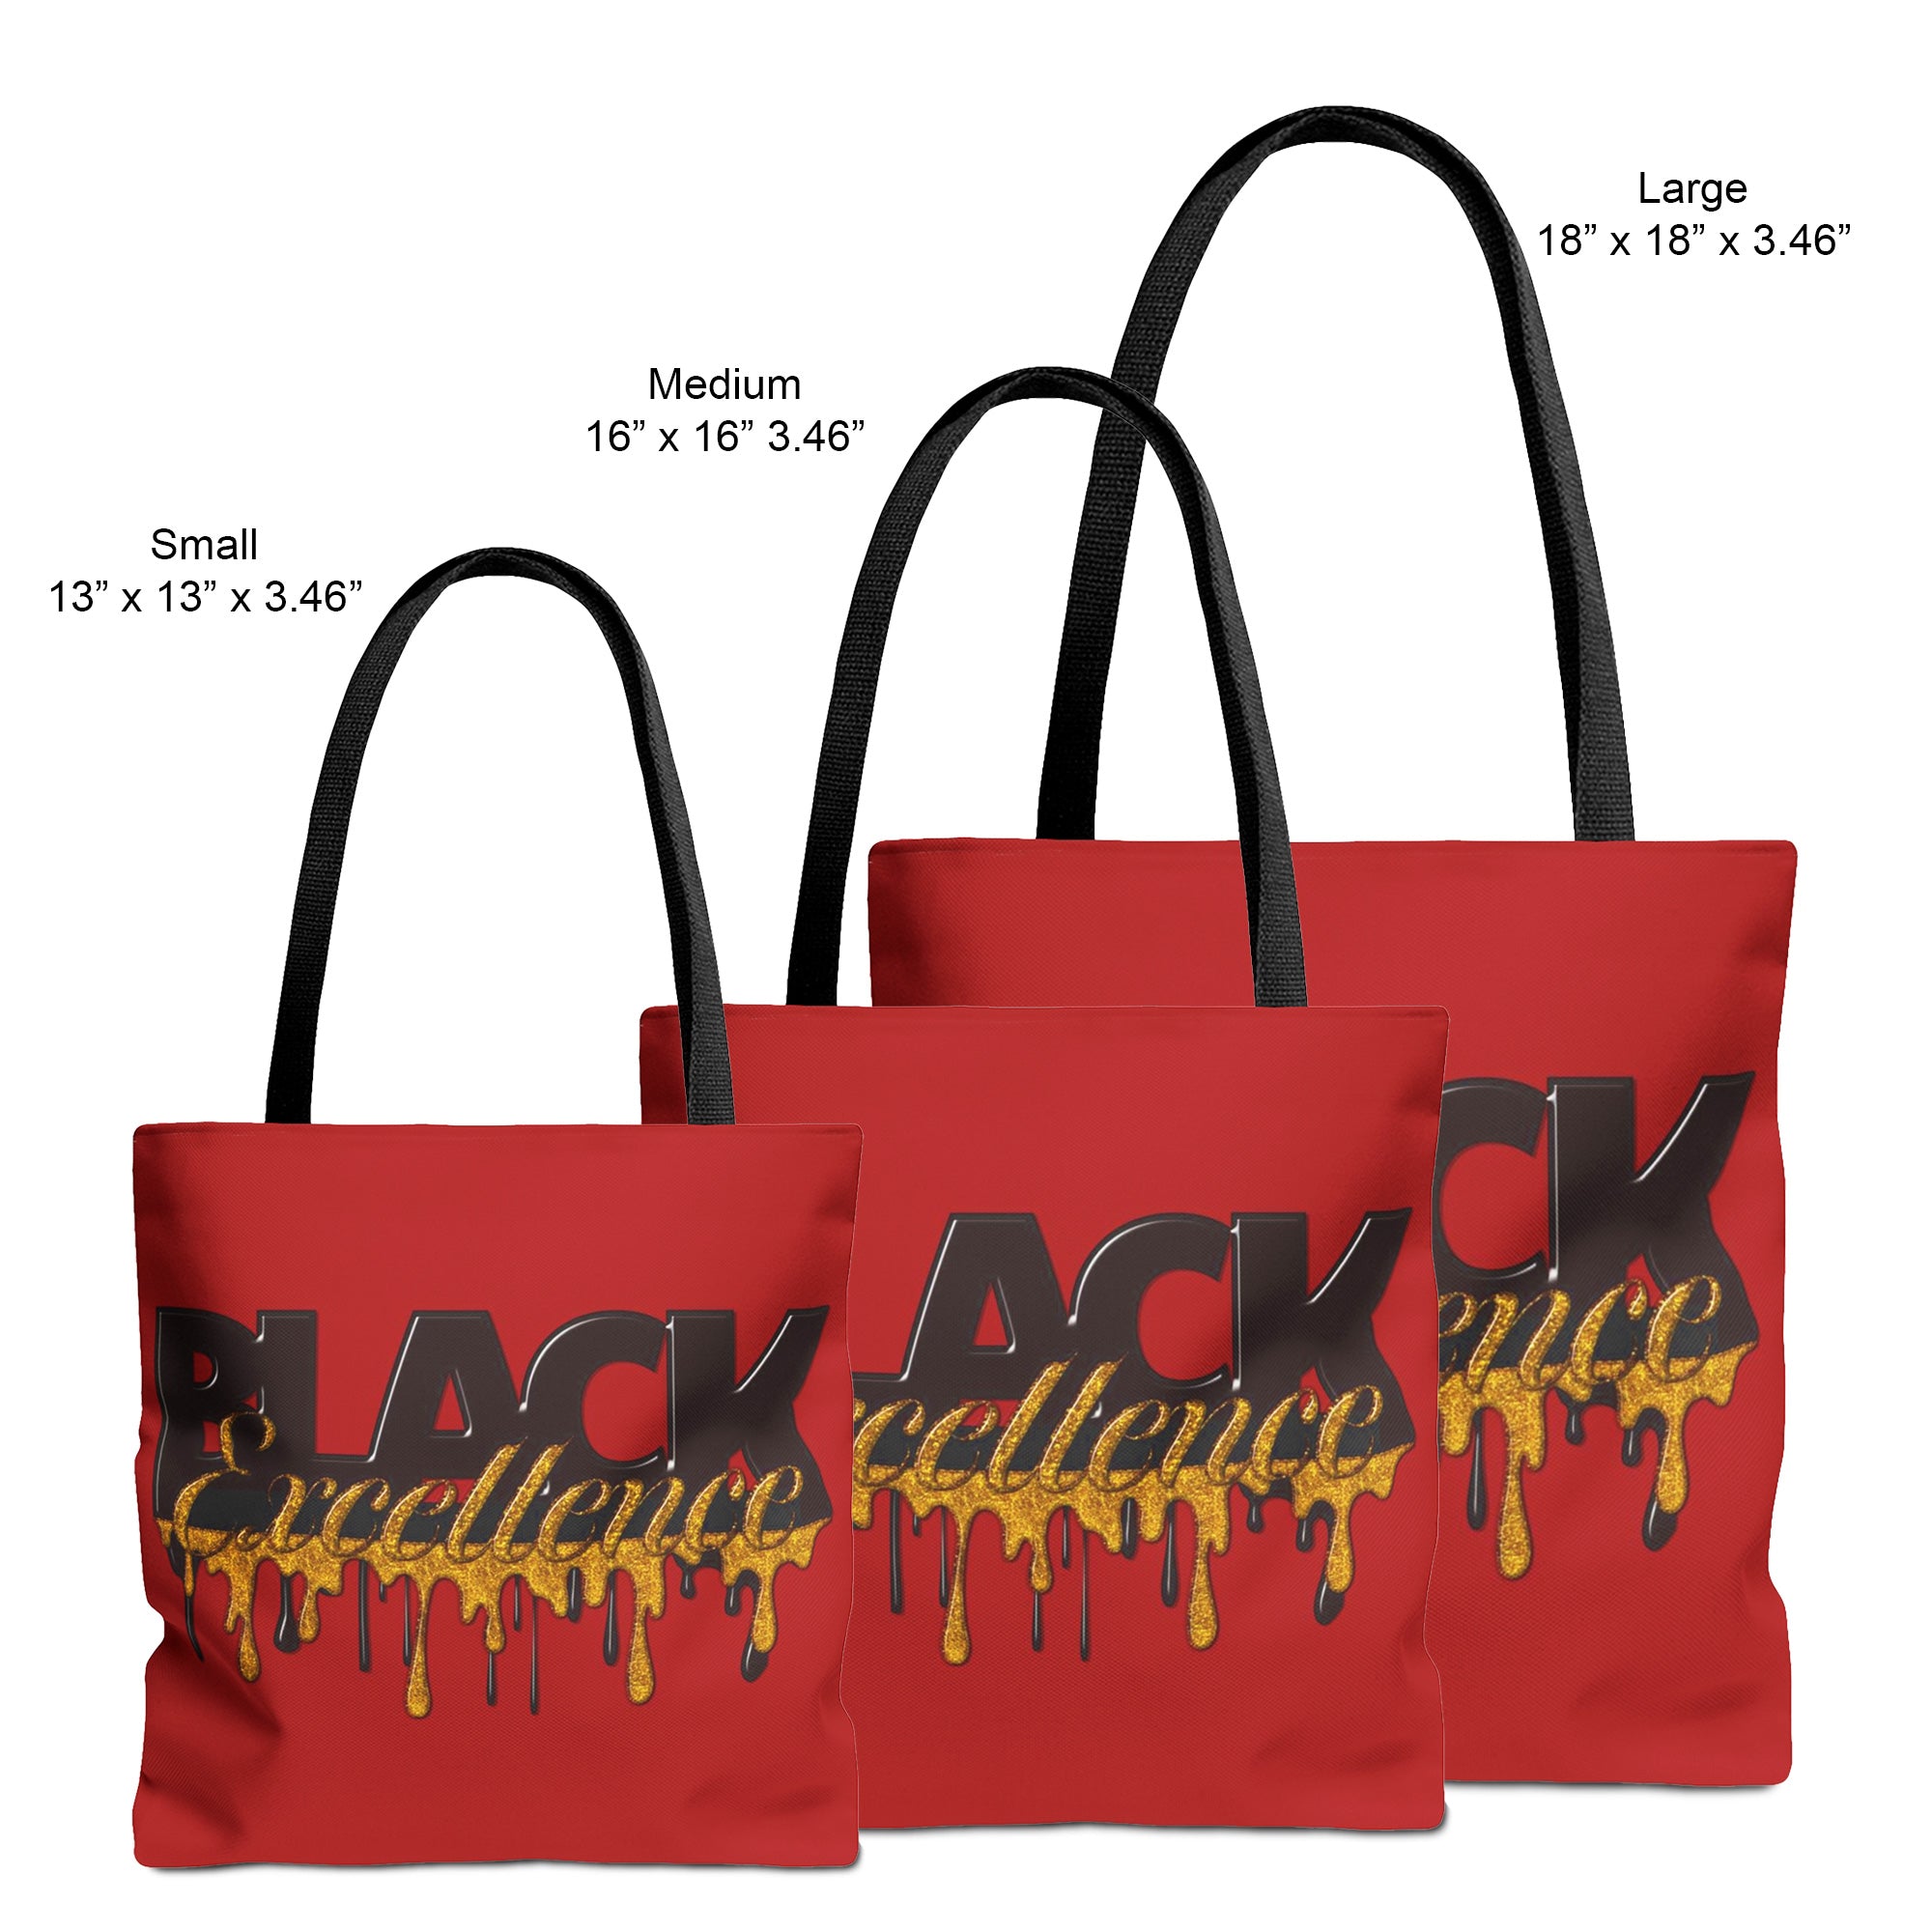 Black Excellence Tote Bag - small, medium and large views.